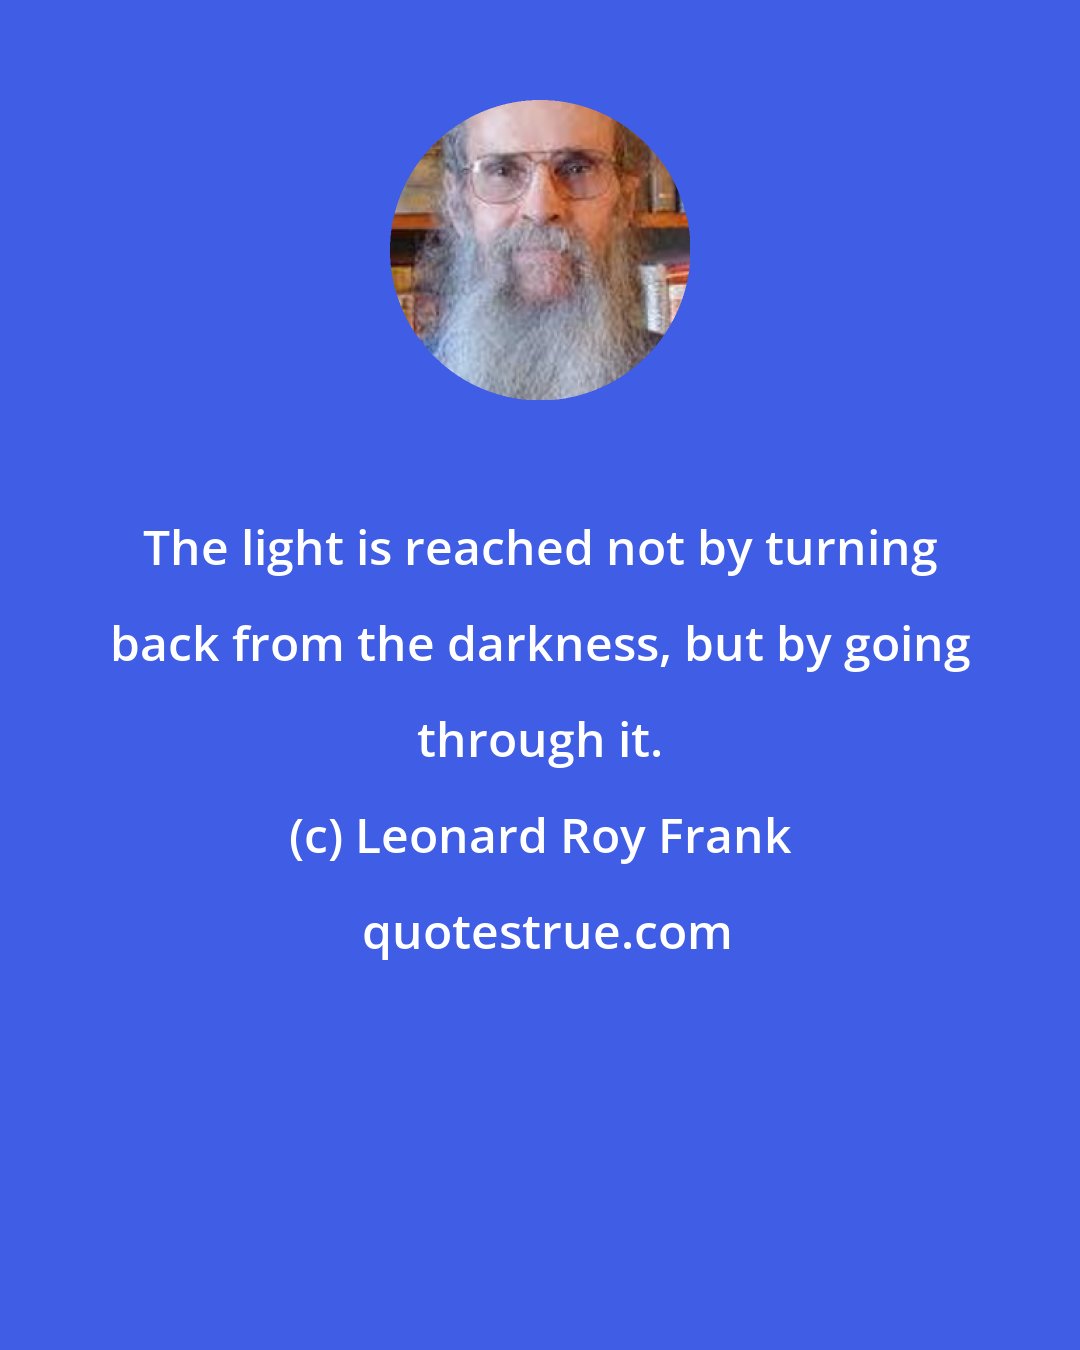 Leonard Roy Frank: The light is reached not by turning back from the darkness, but by going through it.